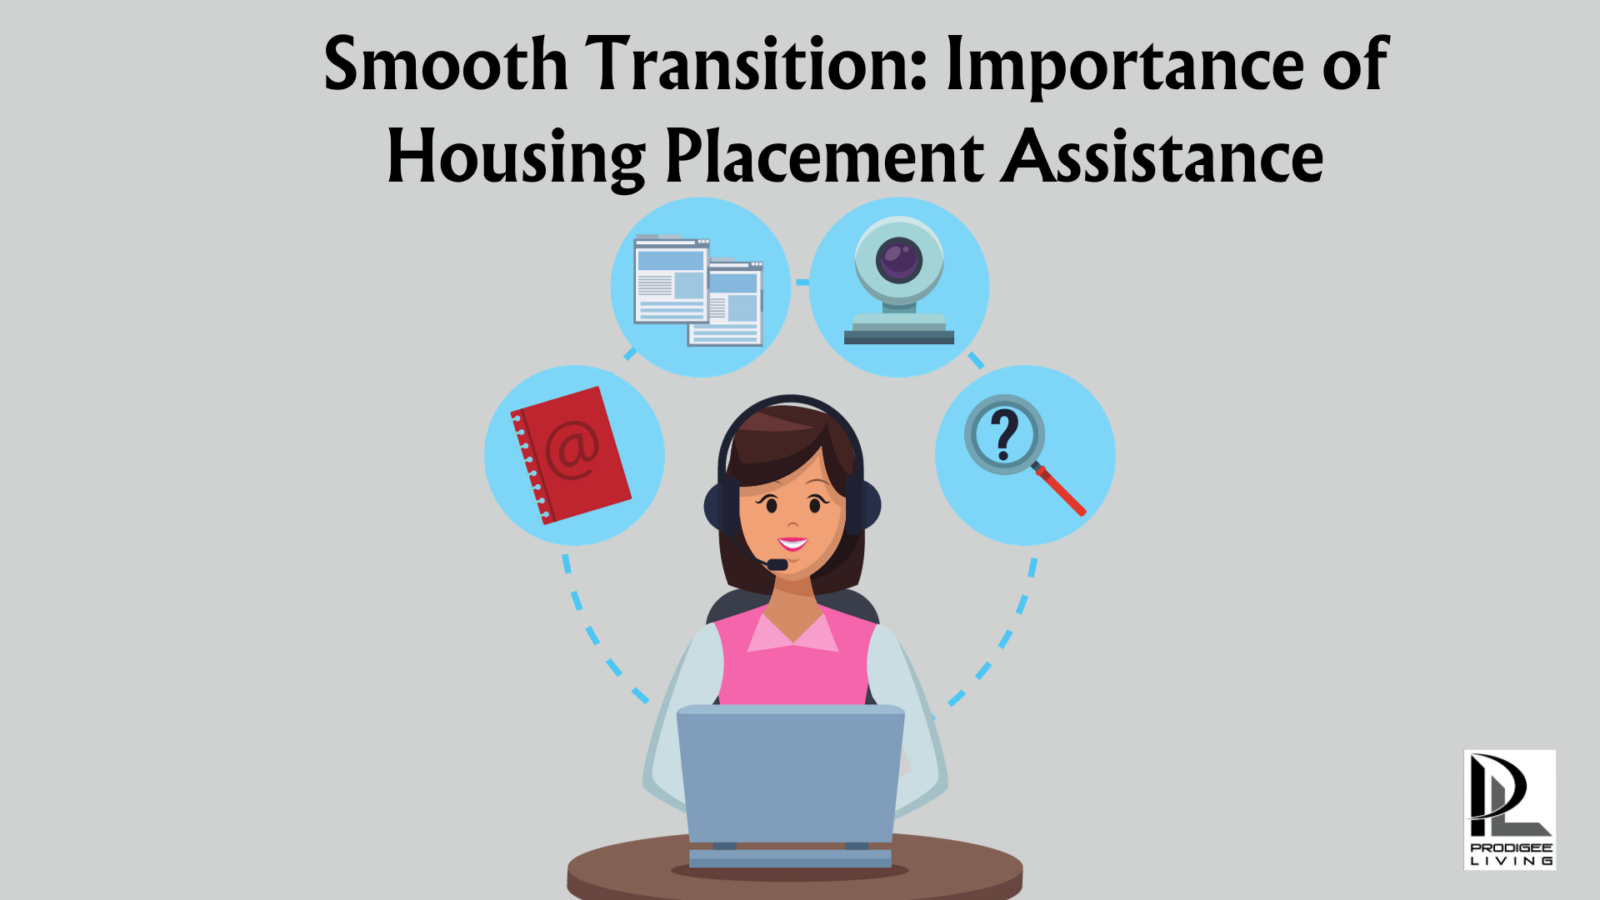 smooth transition: importance of housing placement assistance